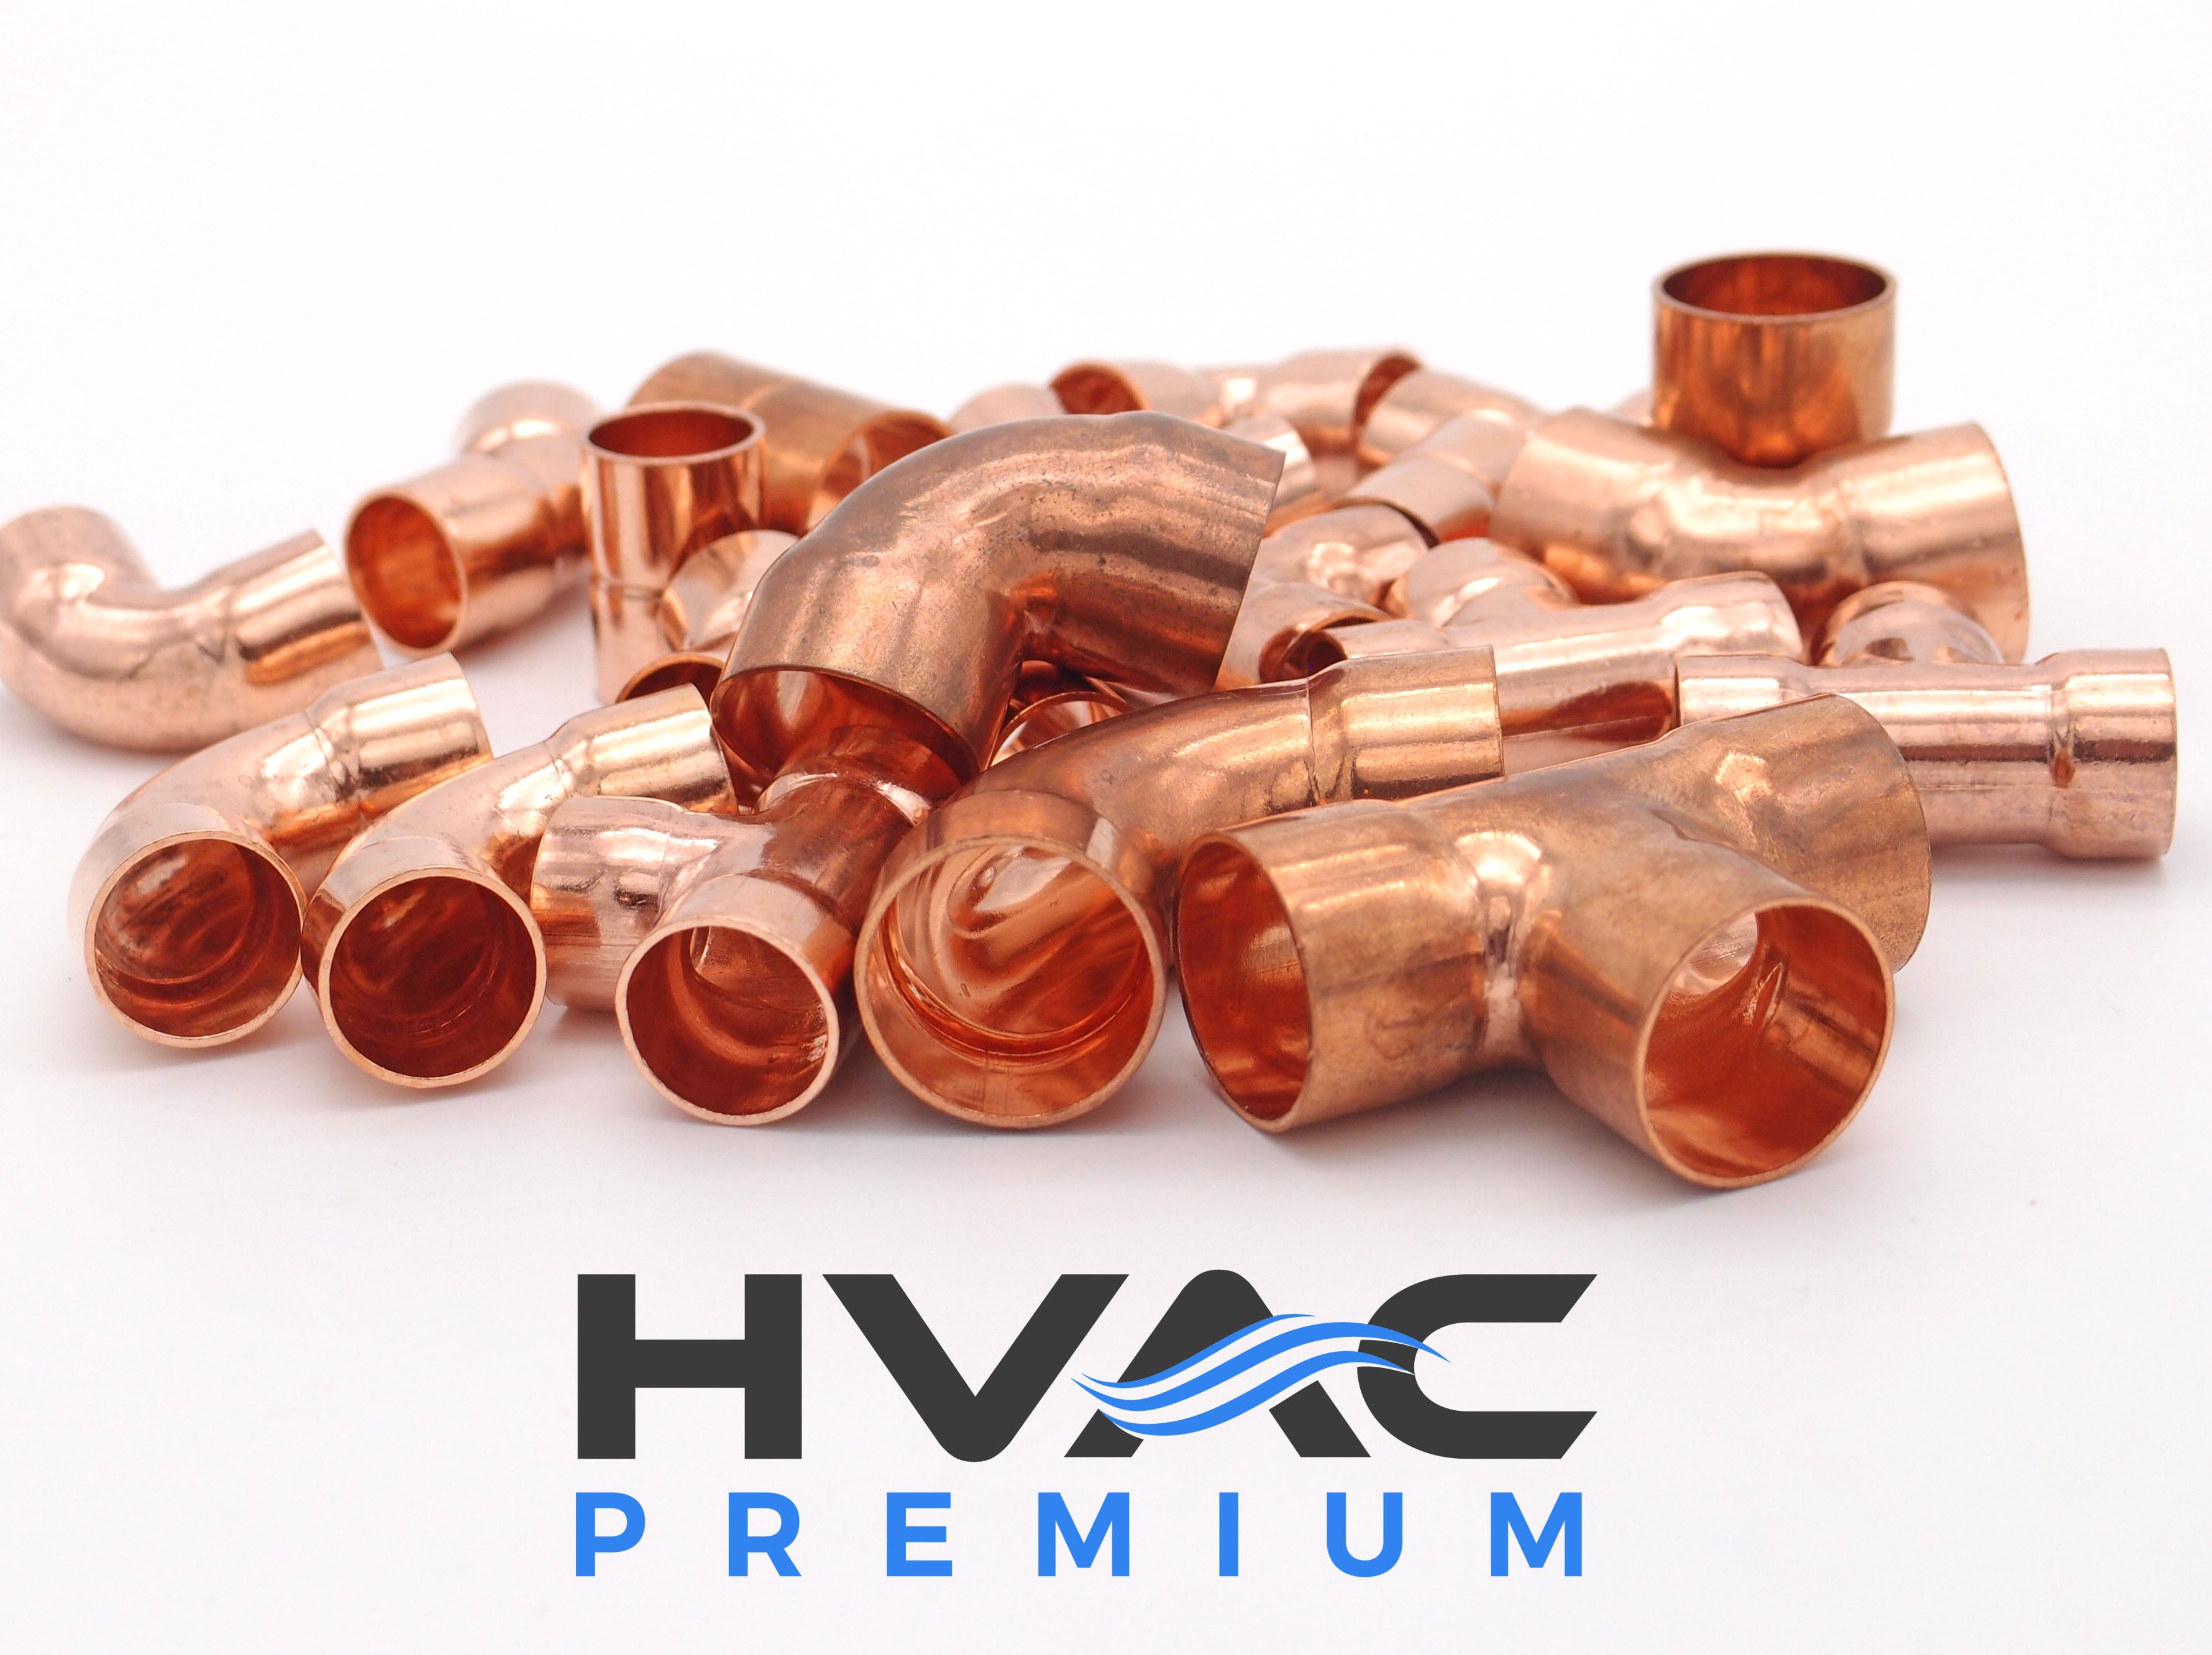 Copper Fitting 7/8 to 1/2 (HVAC Dimensions) Reducer / Increaser Copper Coupling & HVAC – 3/4 to 3/8 (Plumbing Inner Dimensions) 99.9% Pure Copper - 10 Pack